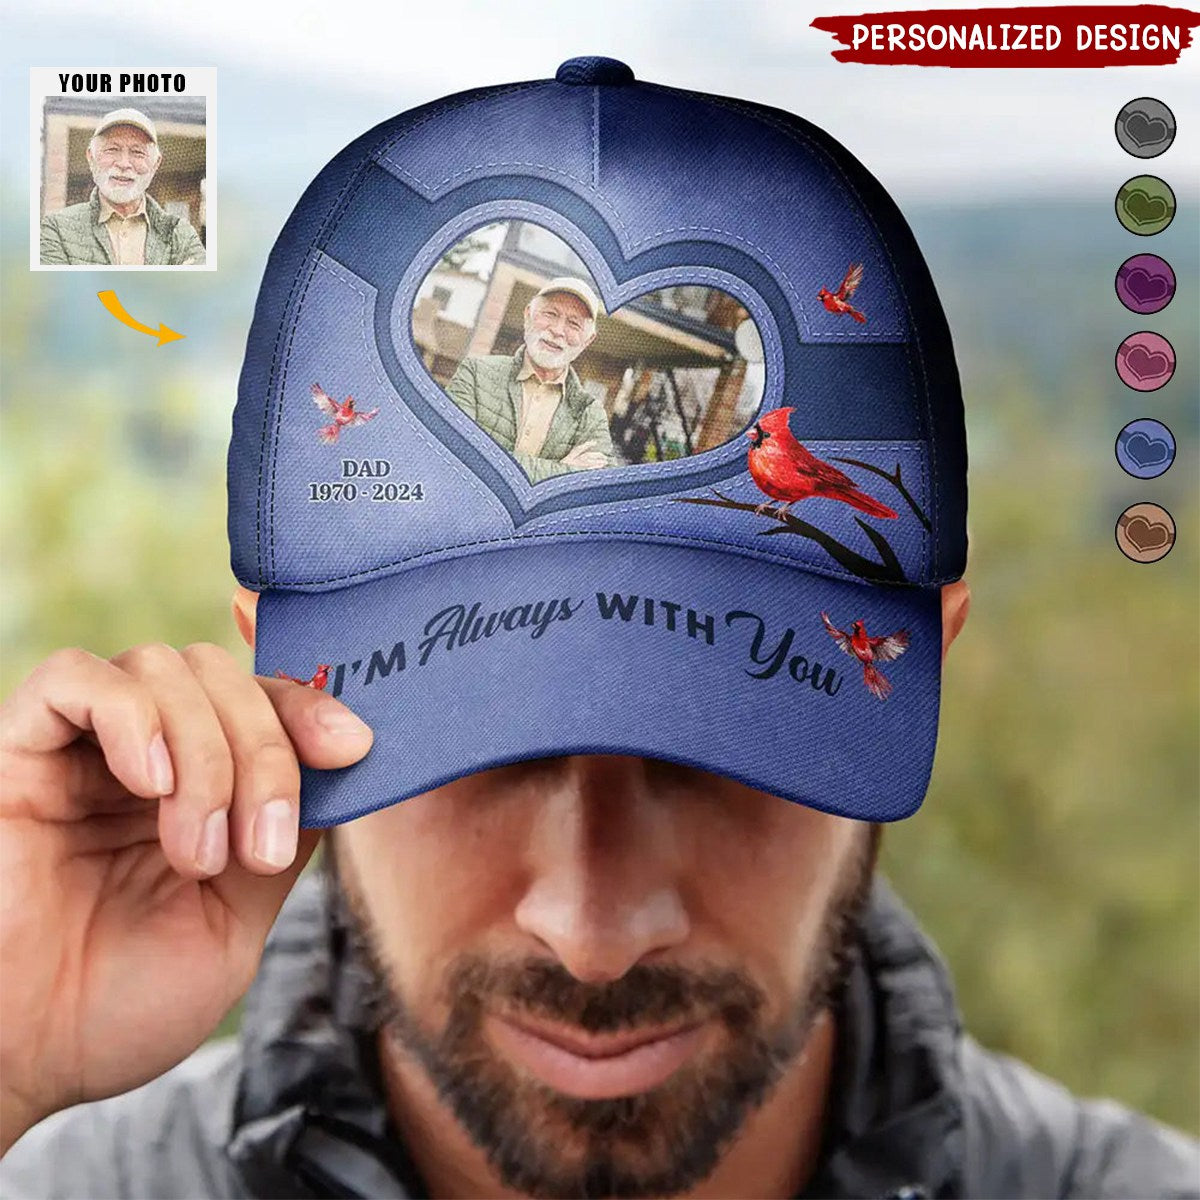 Custom Photo Memorial I'll Carry You With Me Until I See You Again - Personalized Classic Cap